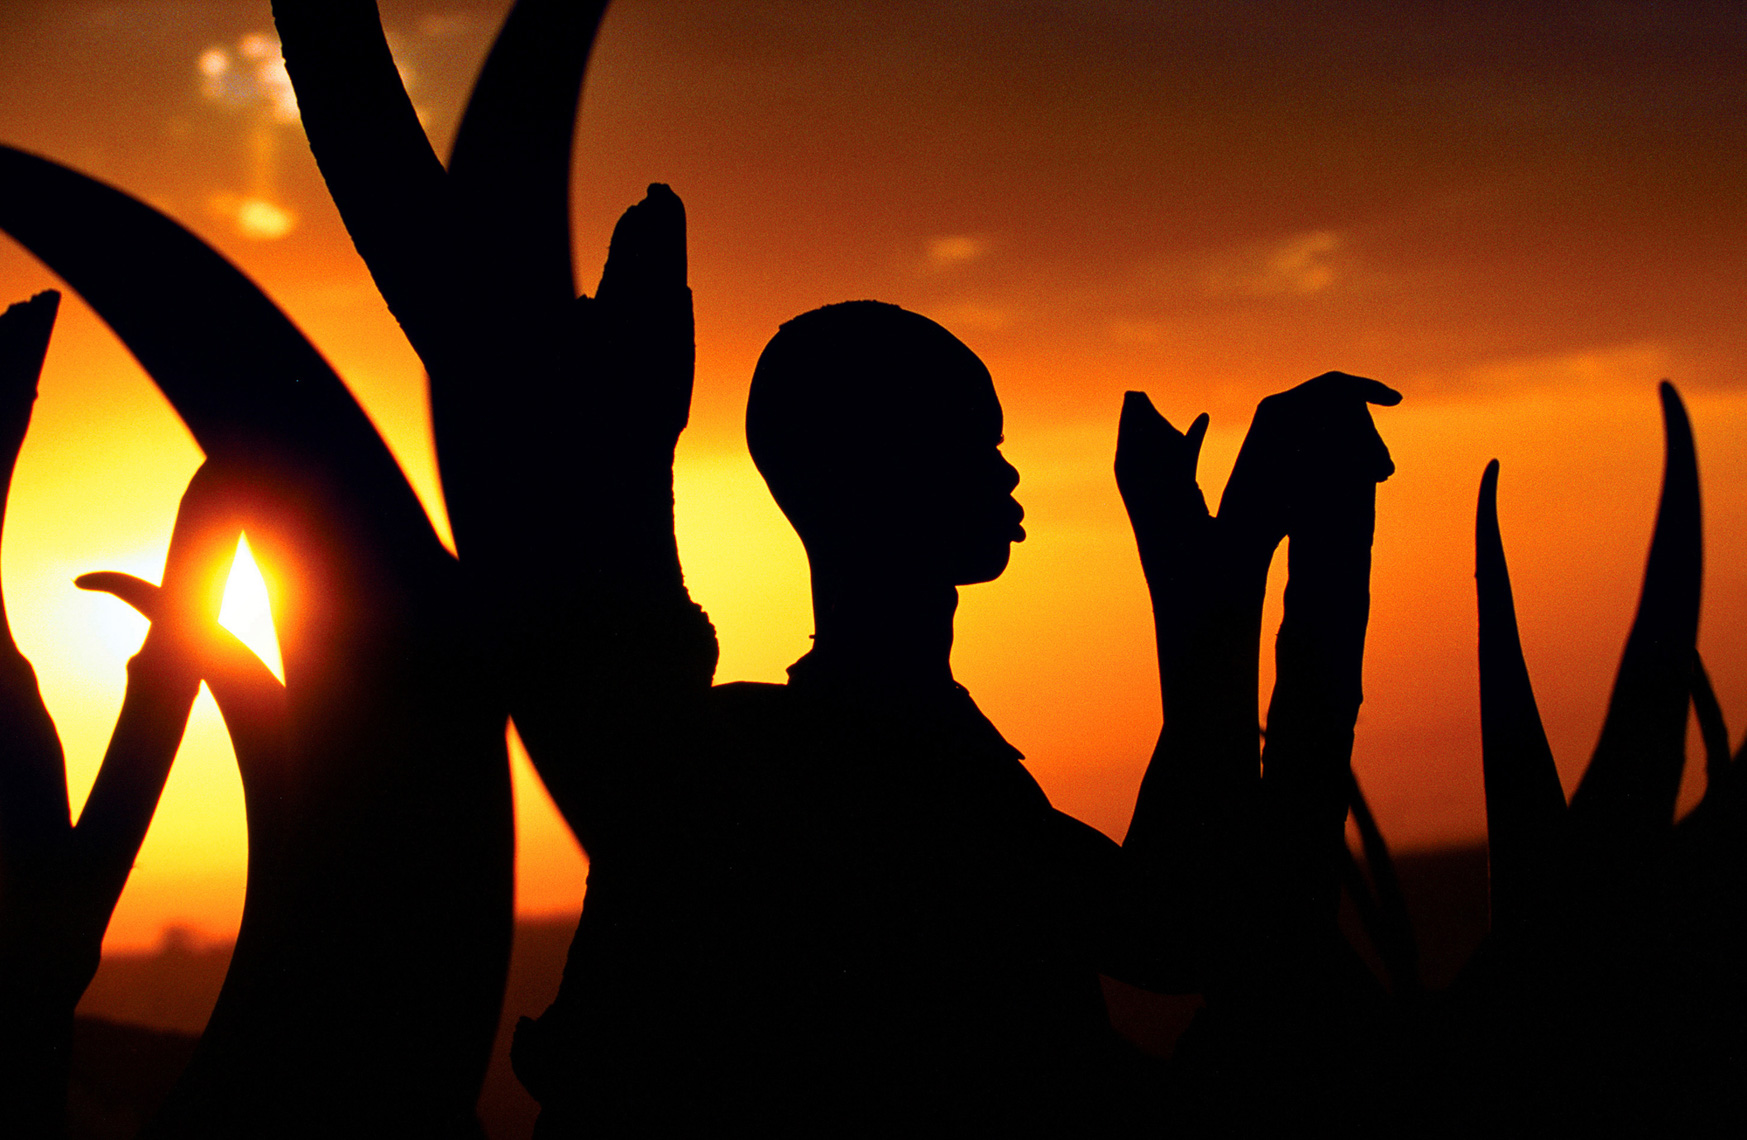 Silhouette of Dinka Man with Horns, South Sudan